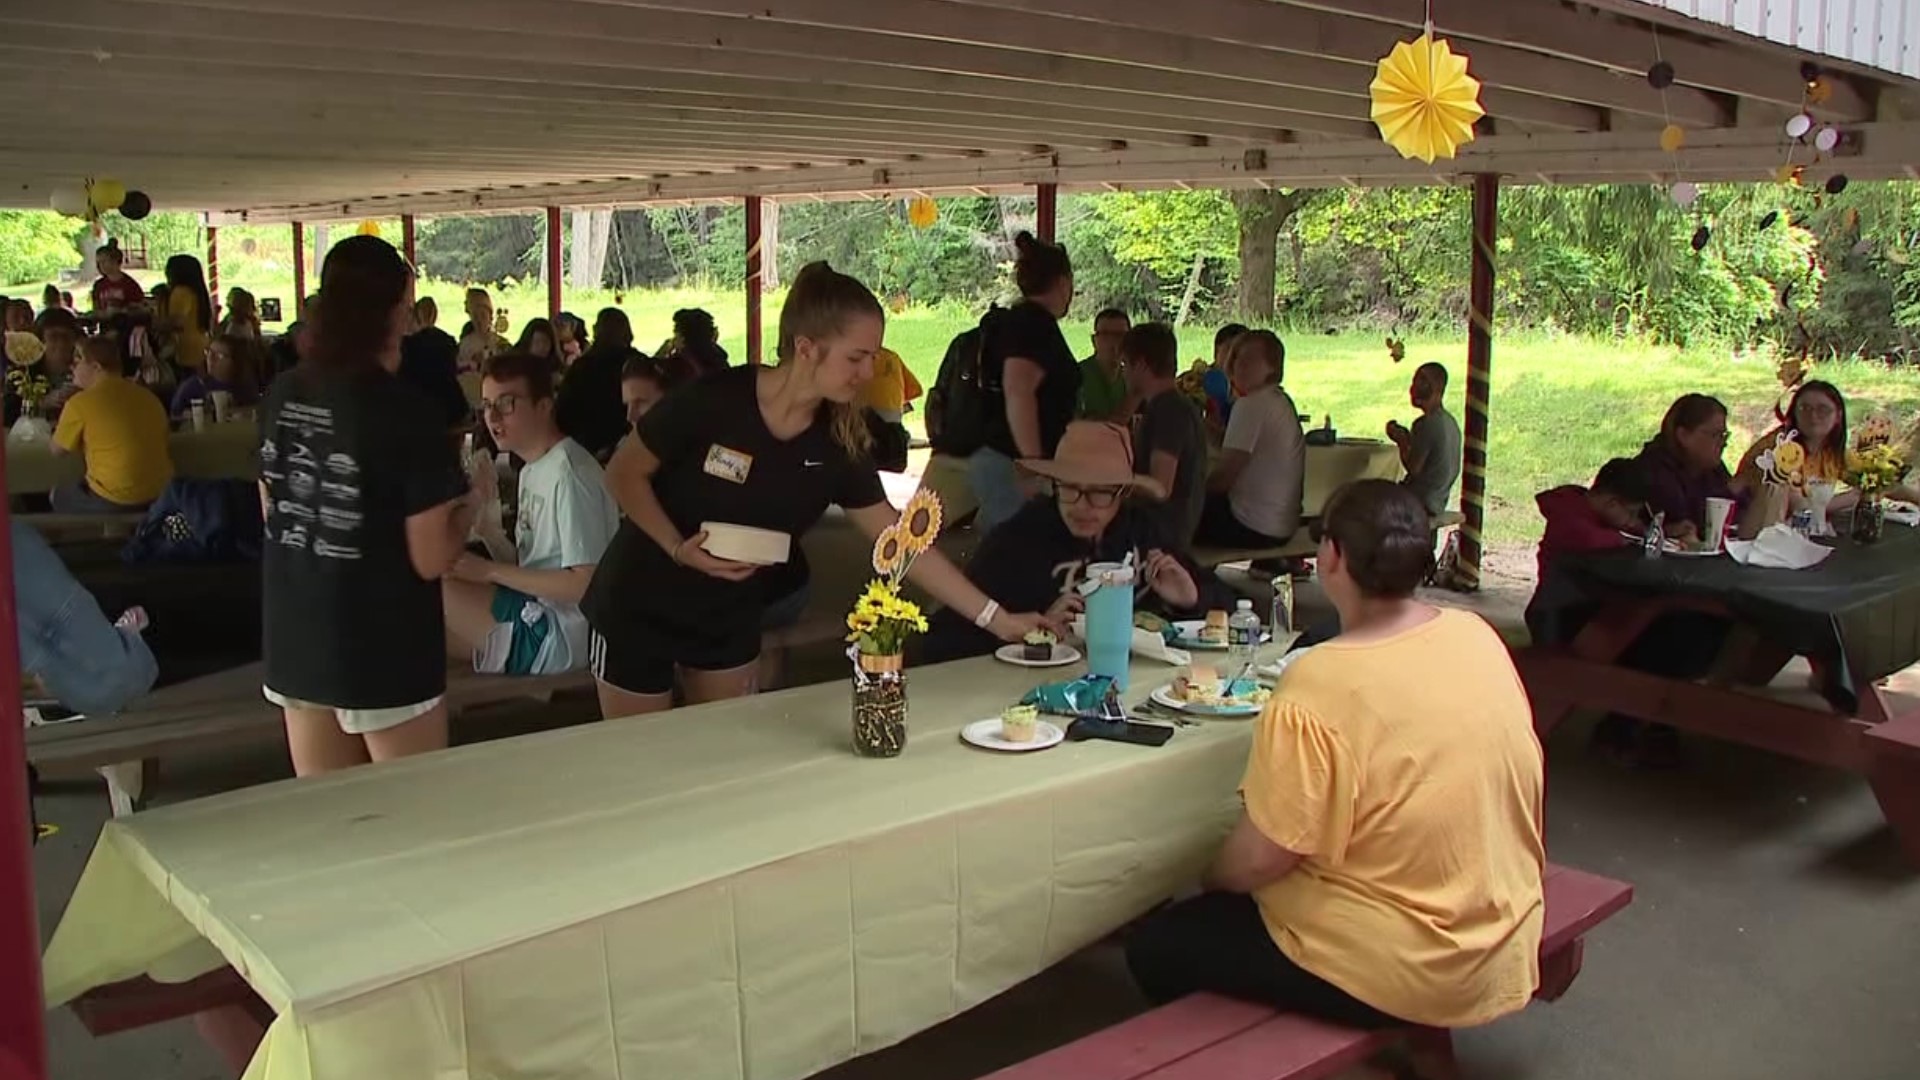 Students from Columbia County gathered for an end-of-the-school-year picnic on Monday.